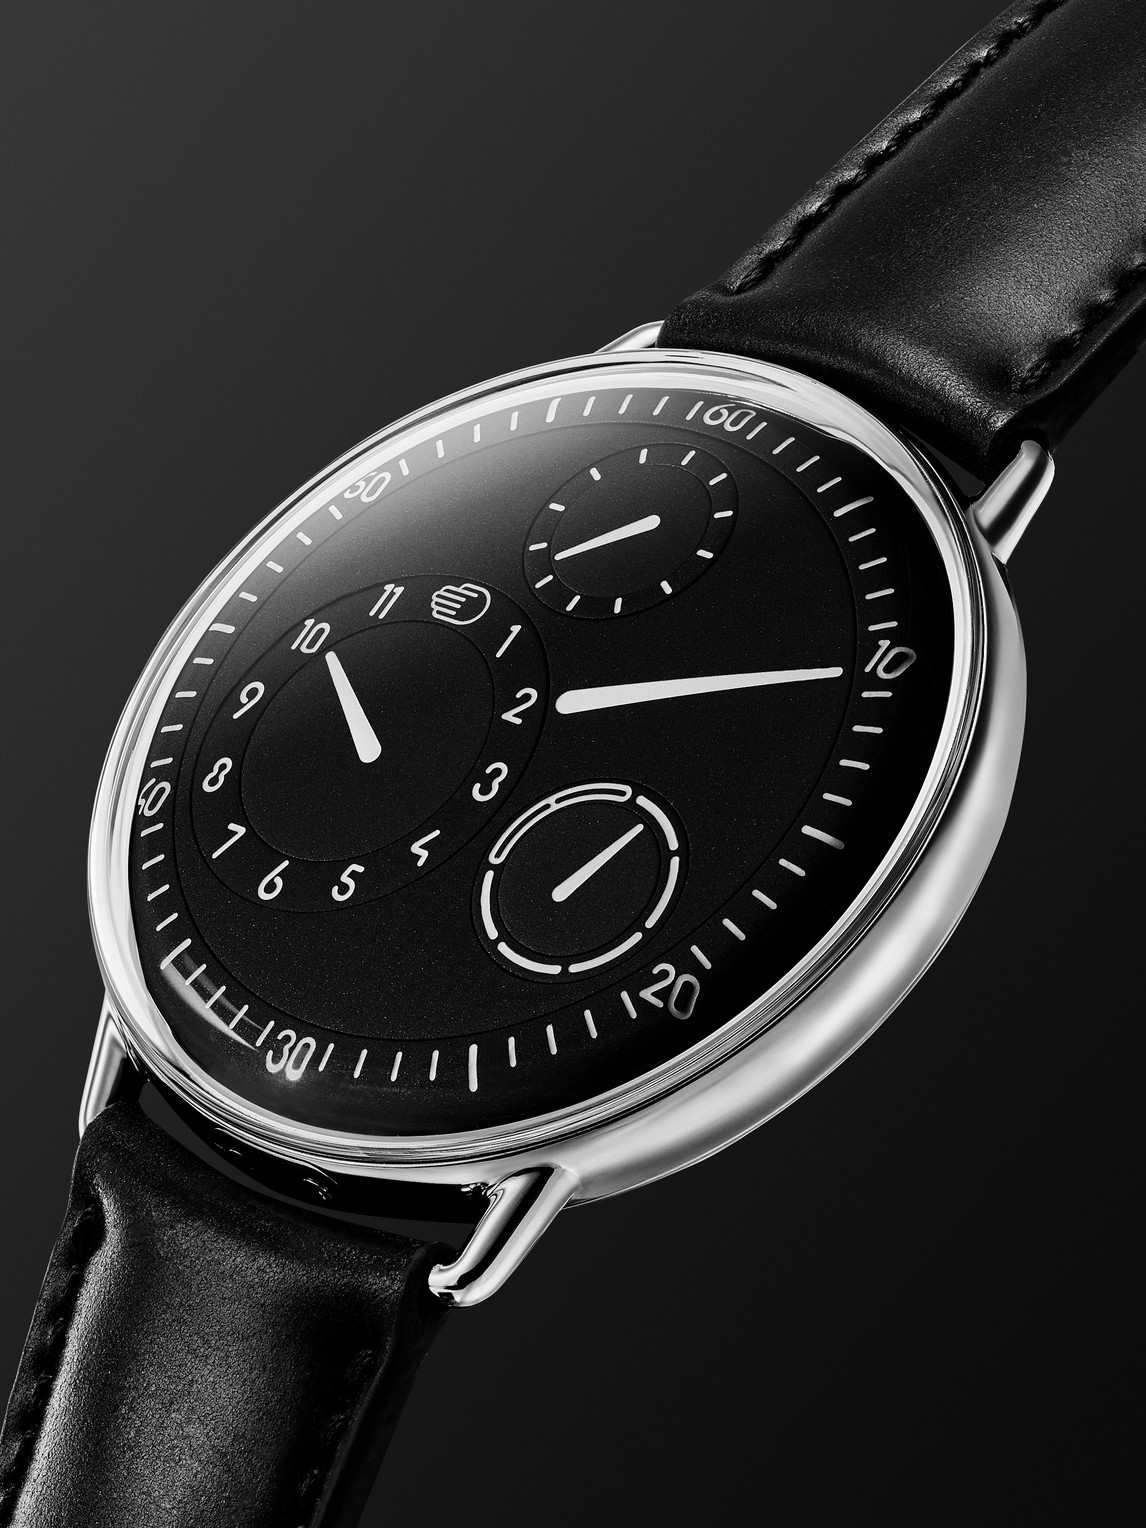 Shop Ressence Type 1 Automatic 42.7mm Titanium And Leather Watch, Ref. No. Type 1b In Black